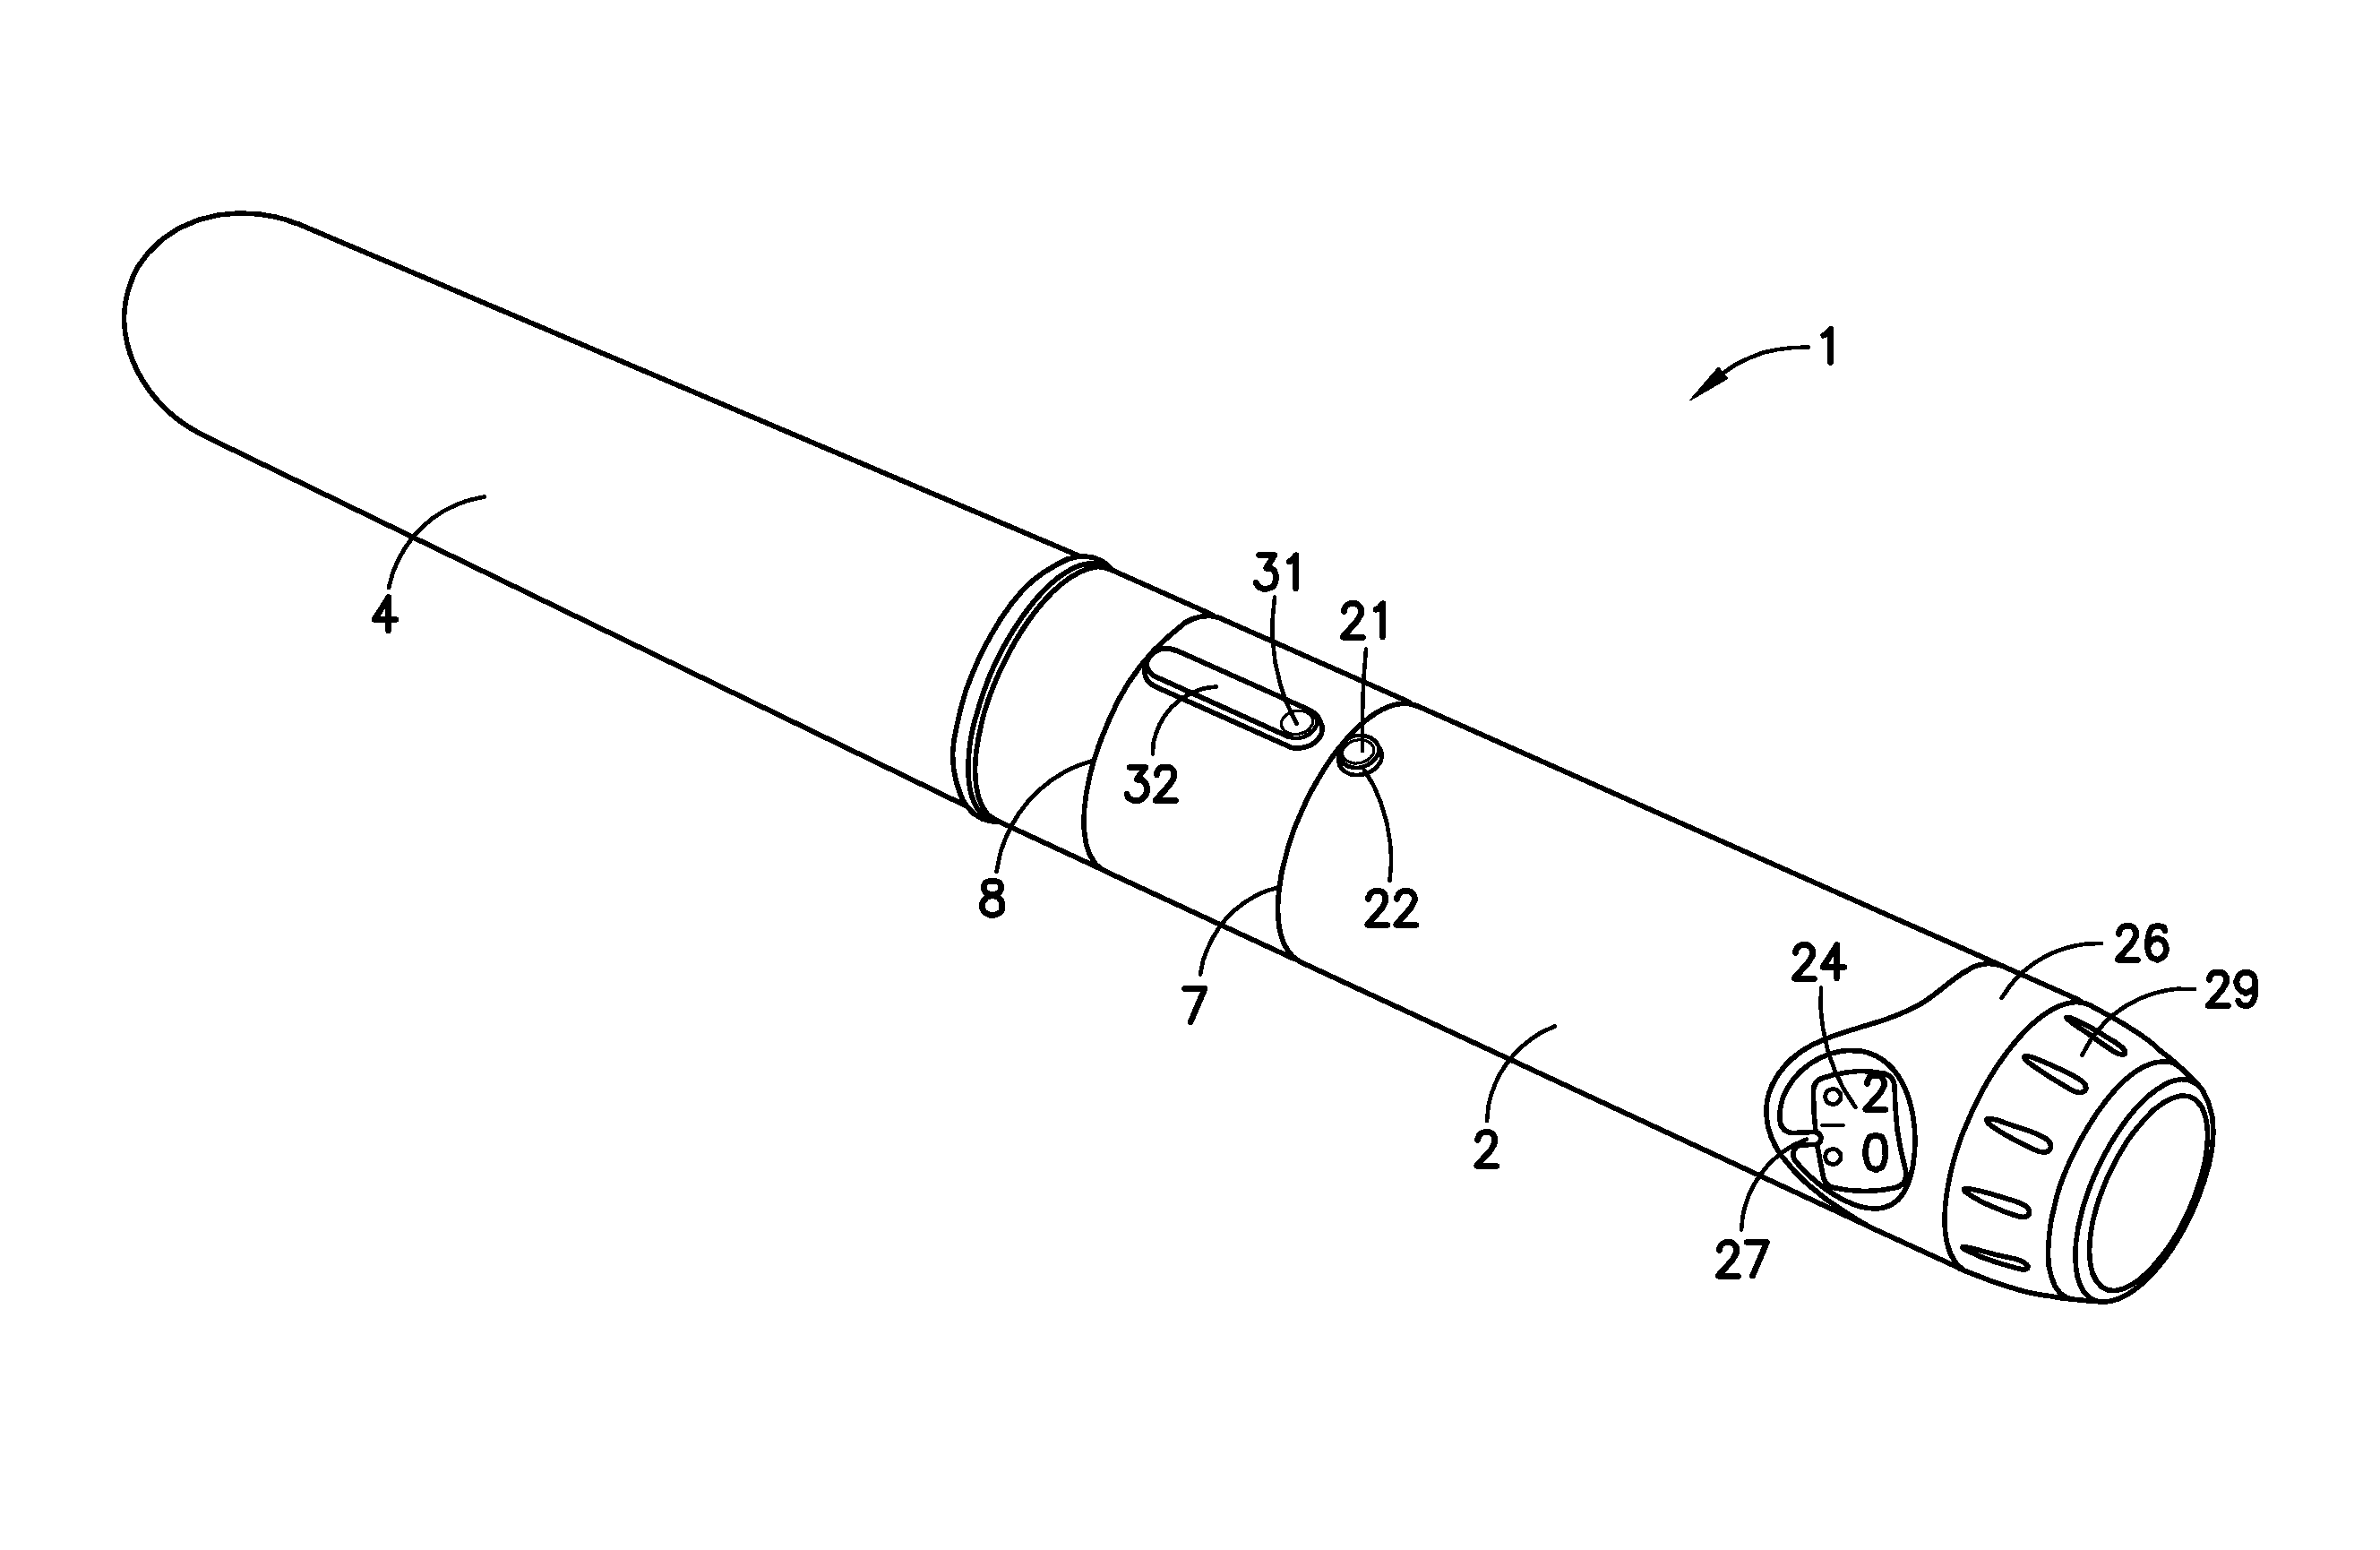 Self-injection device with indicator for indicating proper connection of components